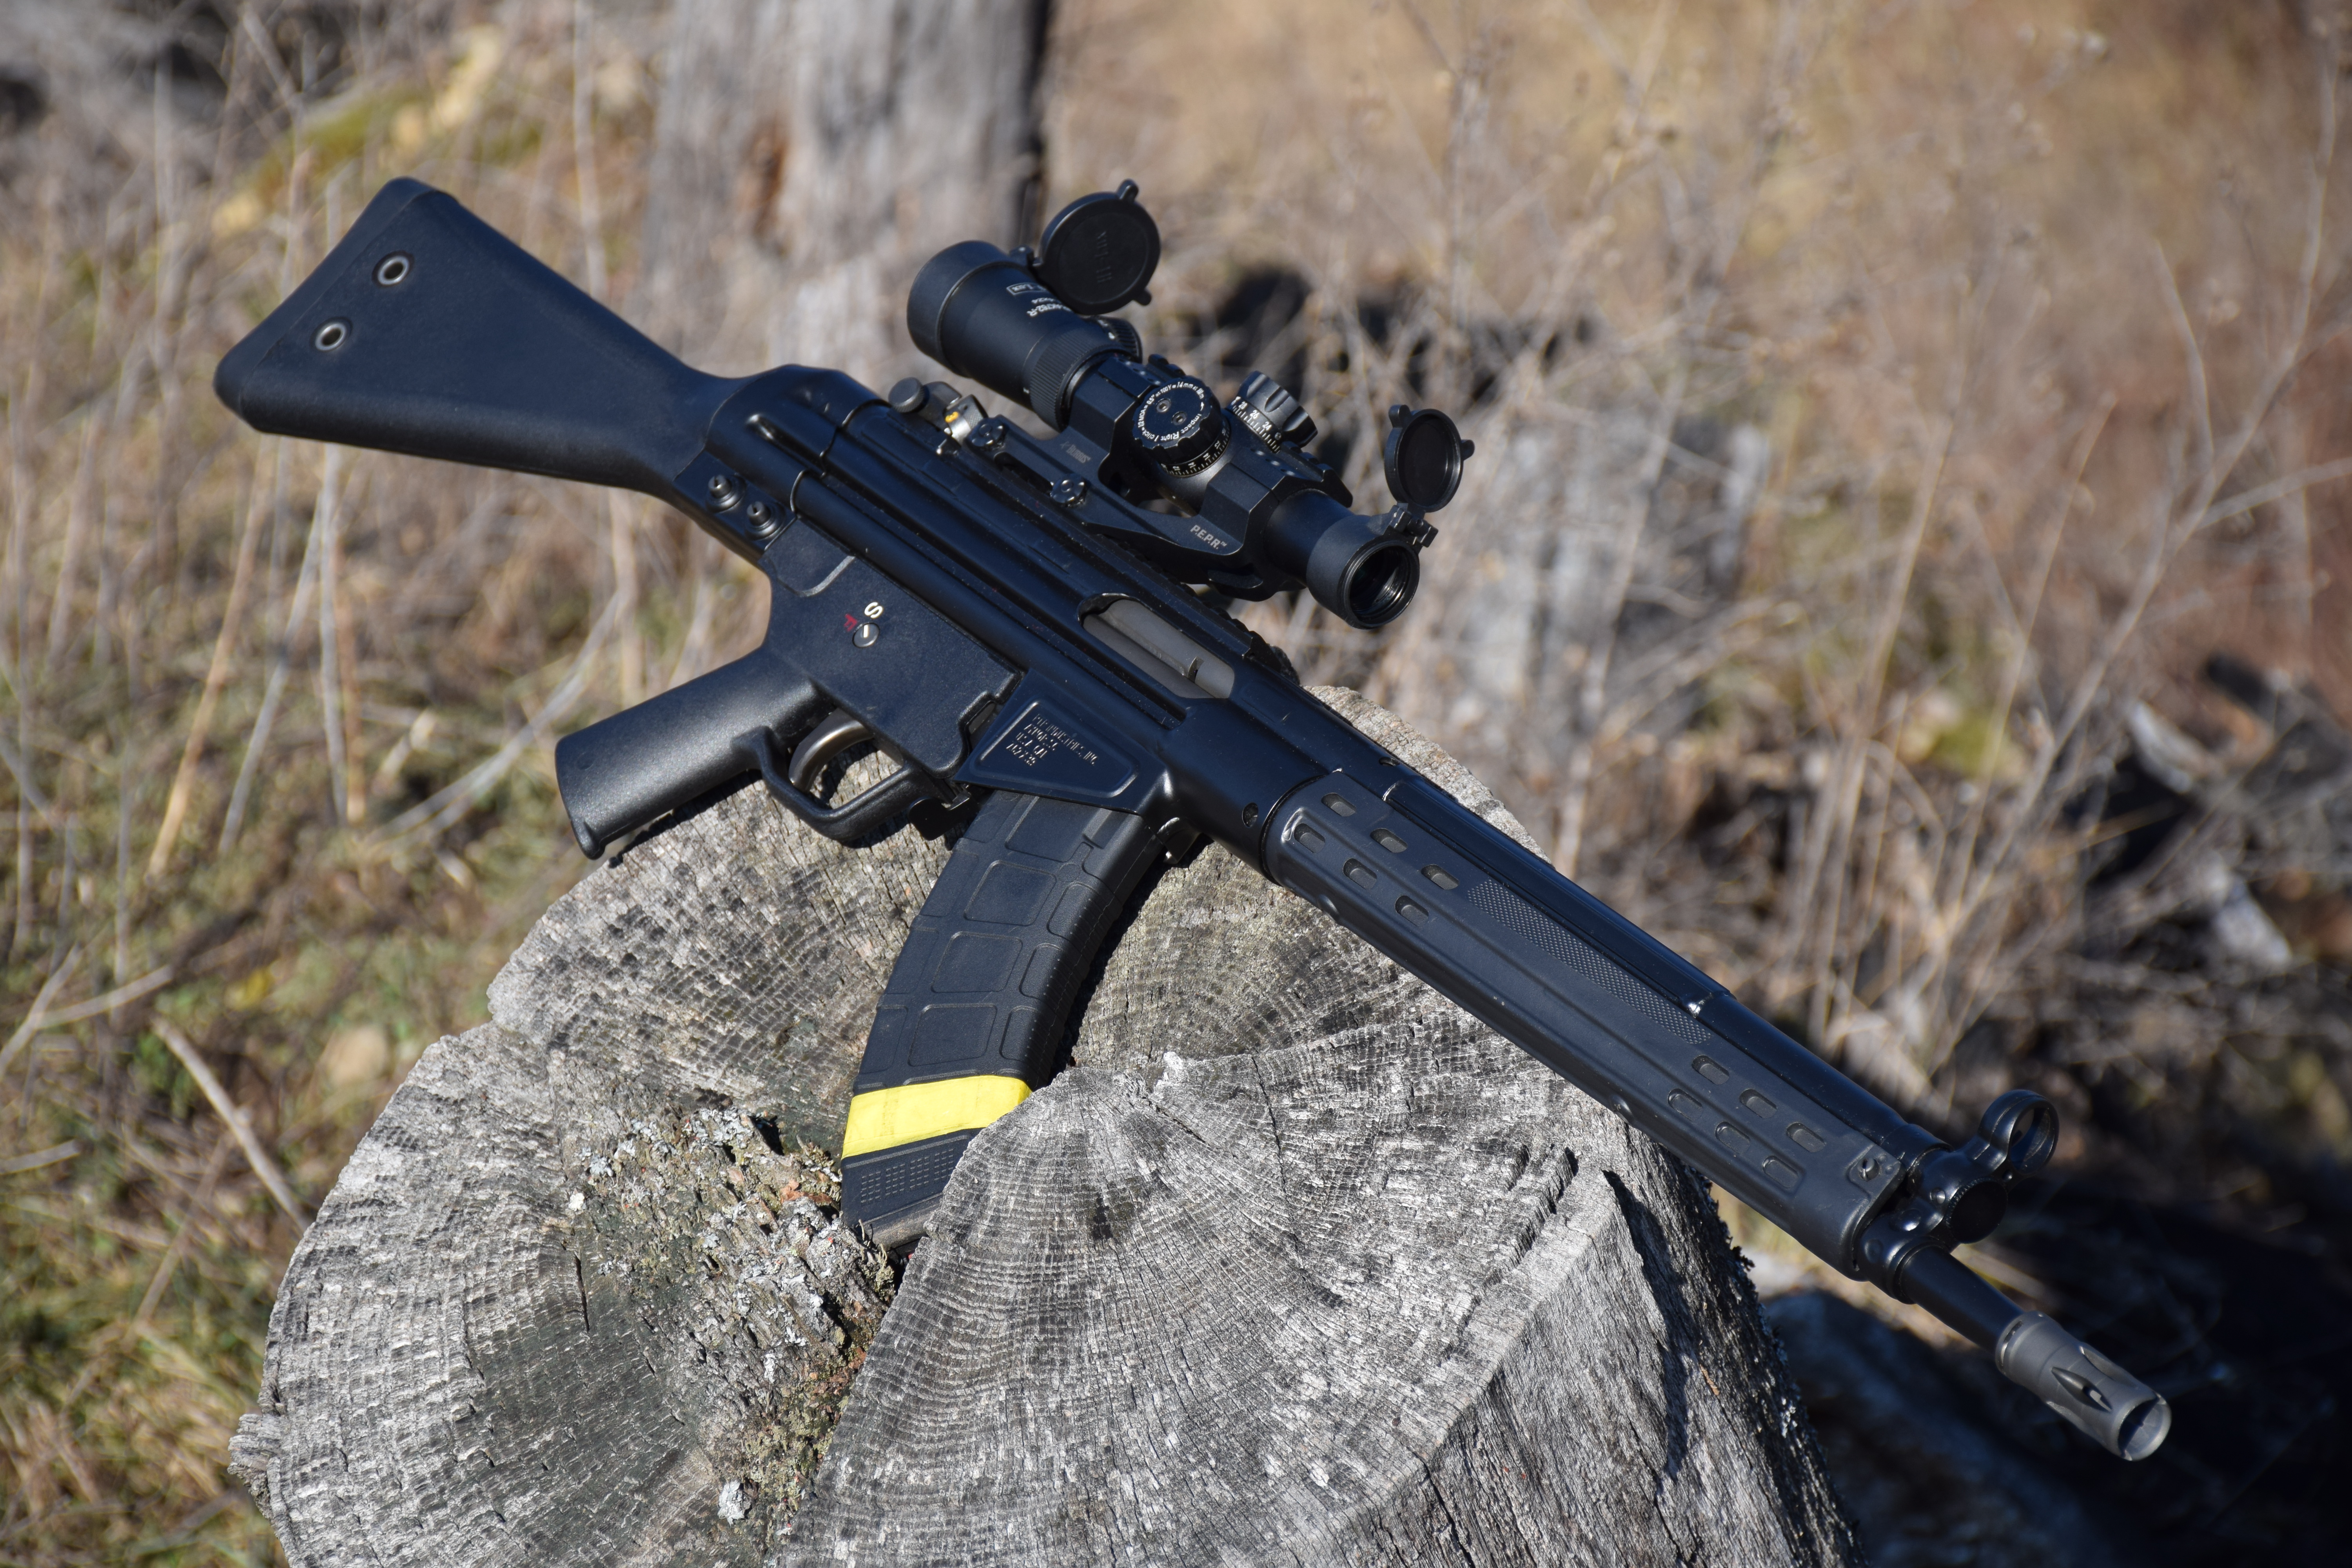 The author mounted a Hi-Lux CMR AK762 1-4x24mm scope to his rifle for accuracy testing.